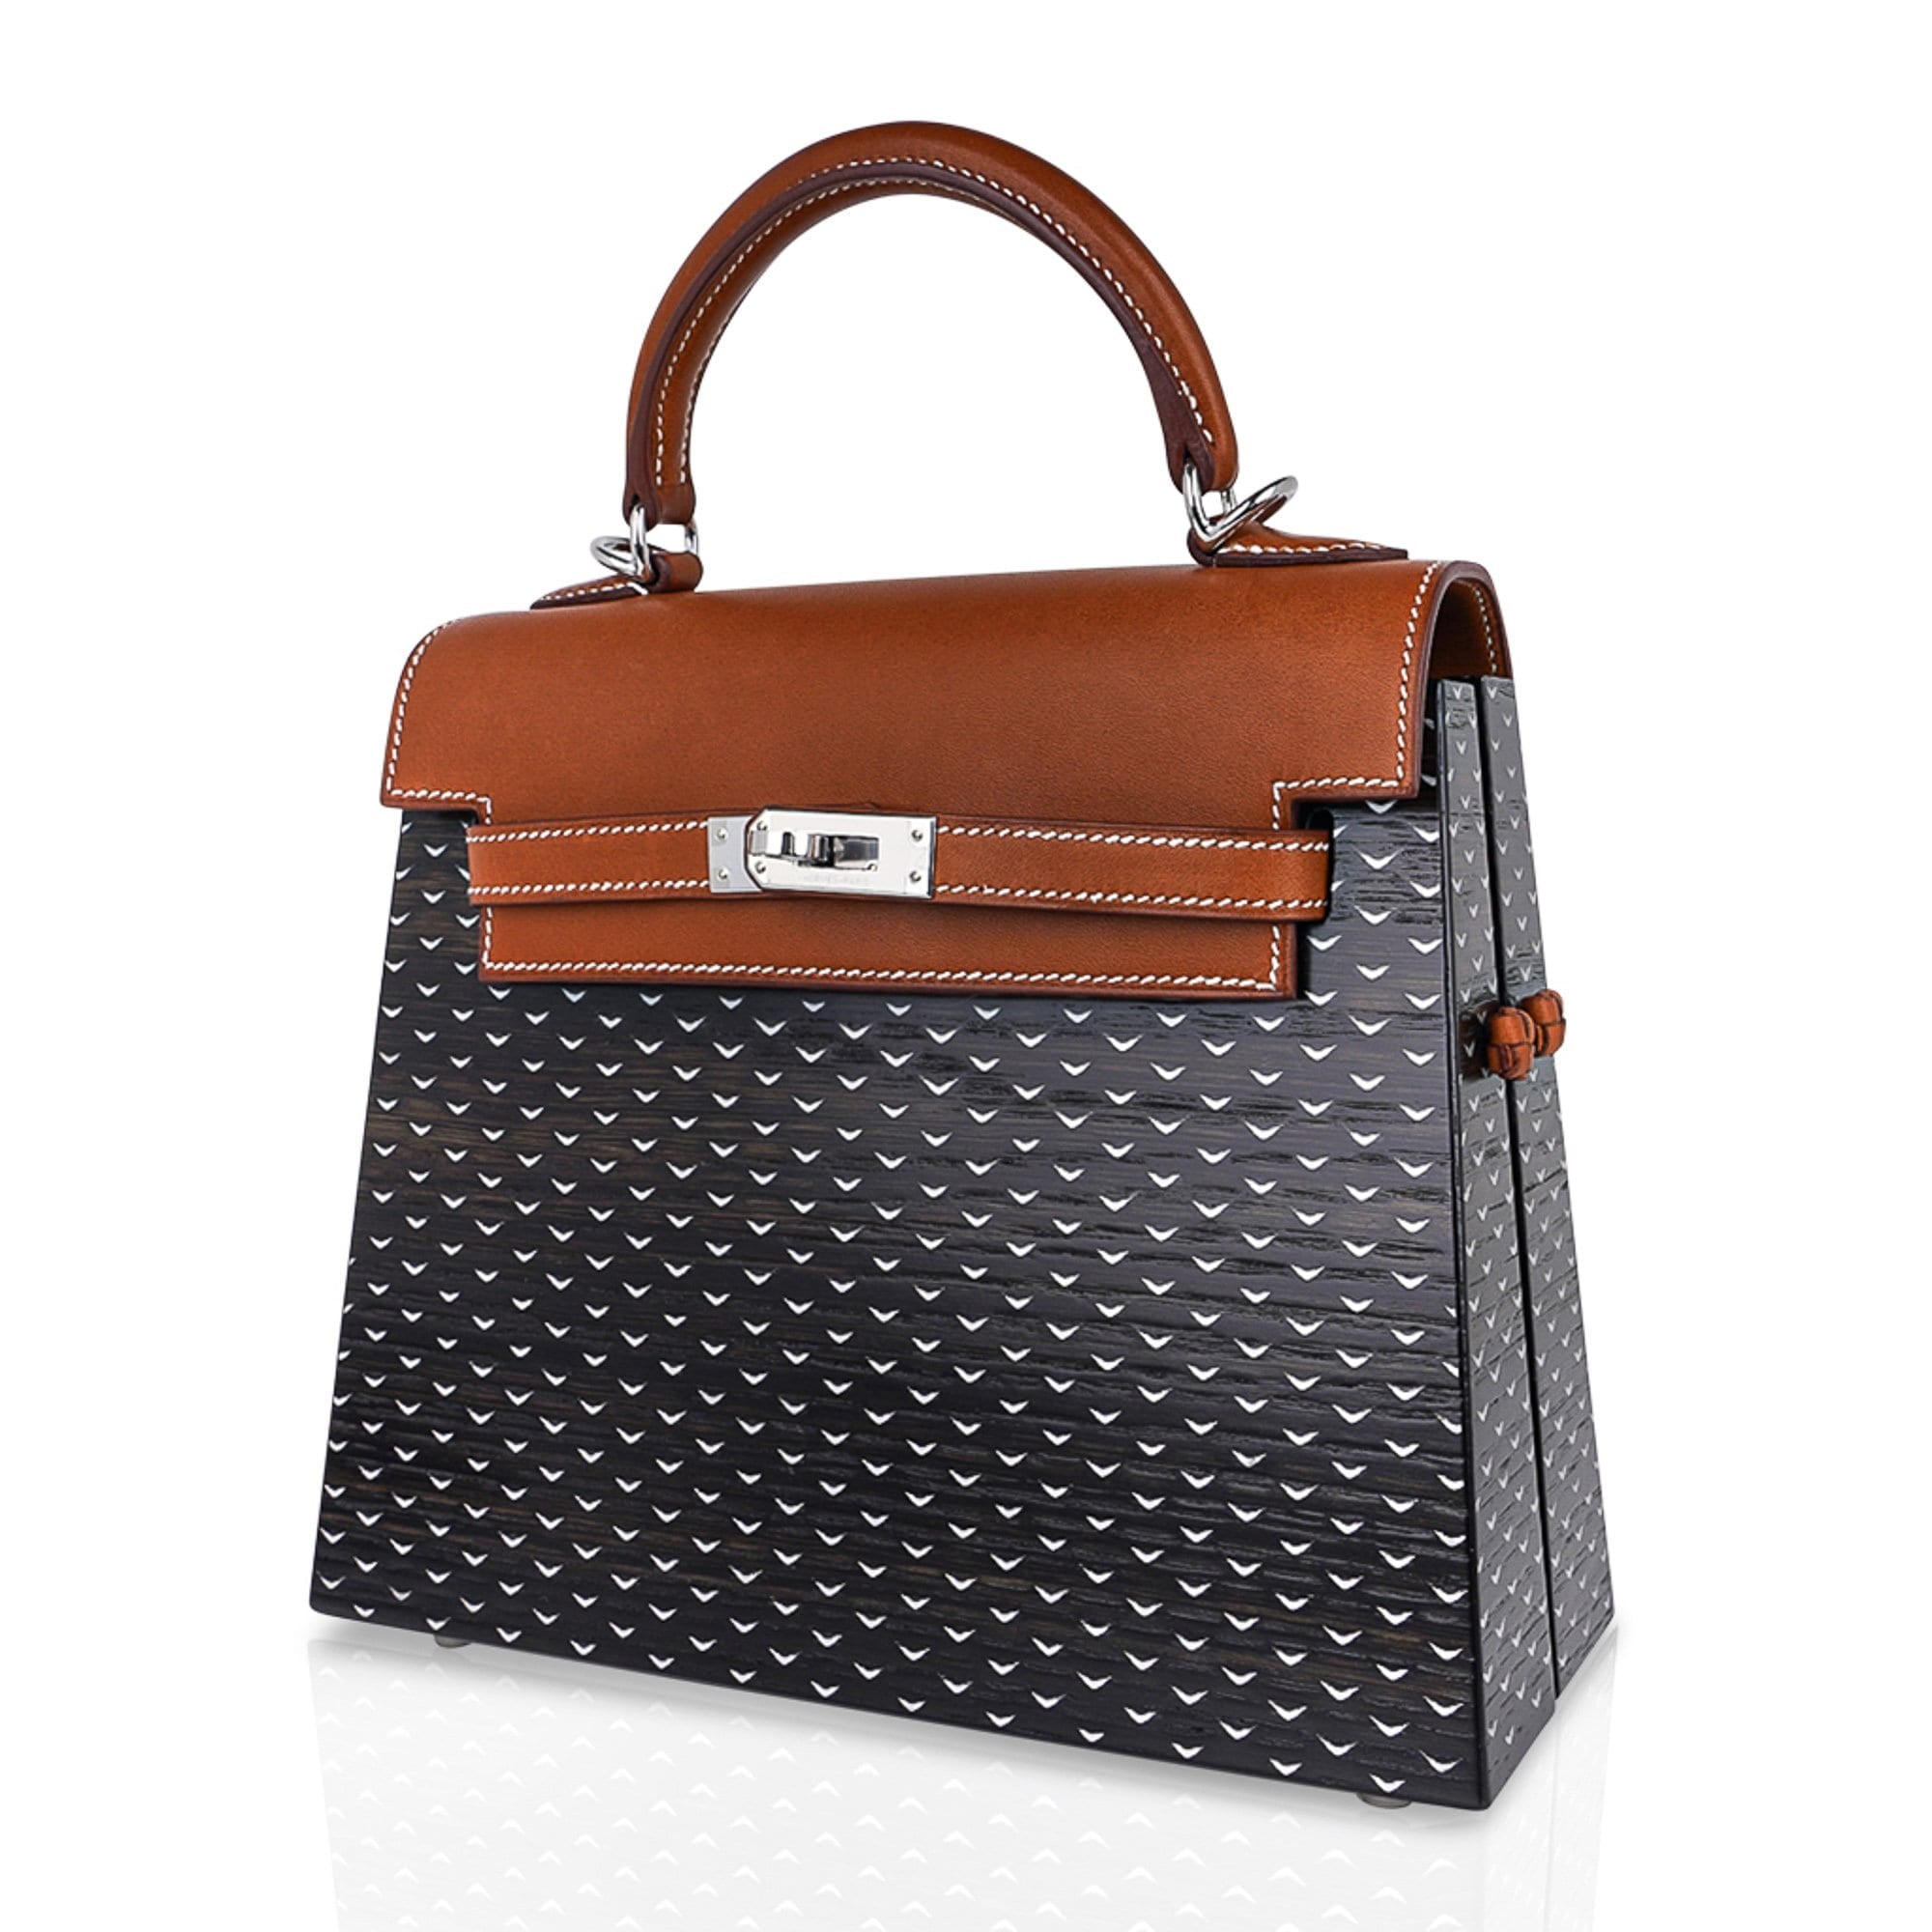 Hermes Limited Edition Kellywood 22 Bag in Wood with Aluminum and Barenia Leather Palladium Hardware